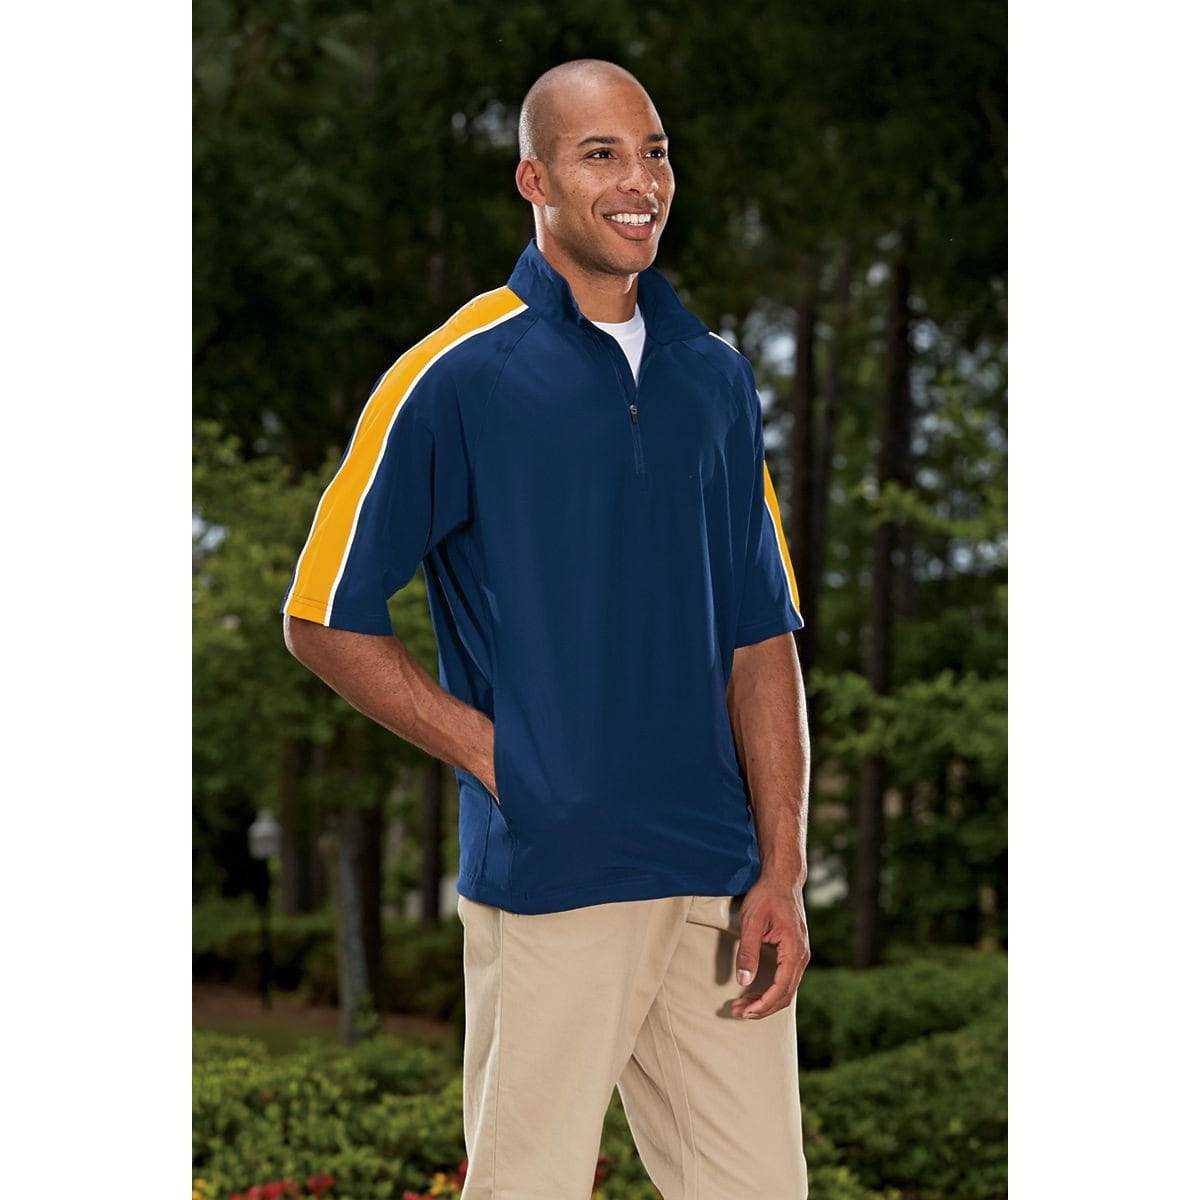 Augusta 3788 Quantum Short Sleeve Pullover - Royal Gold White - HIT a Double